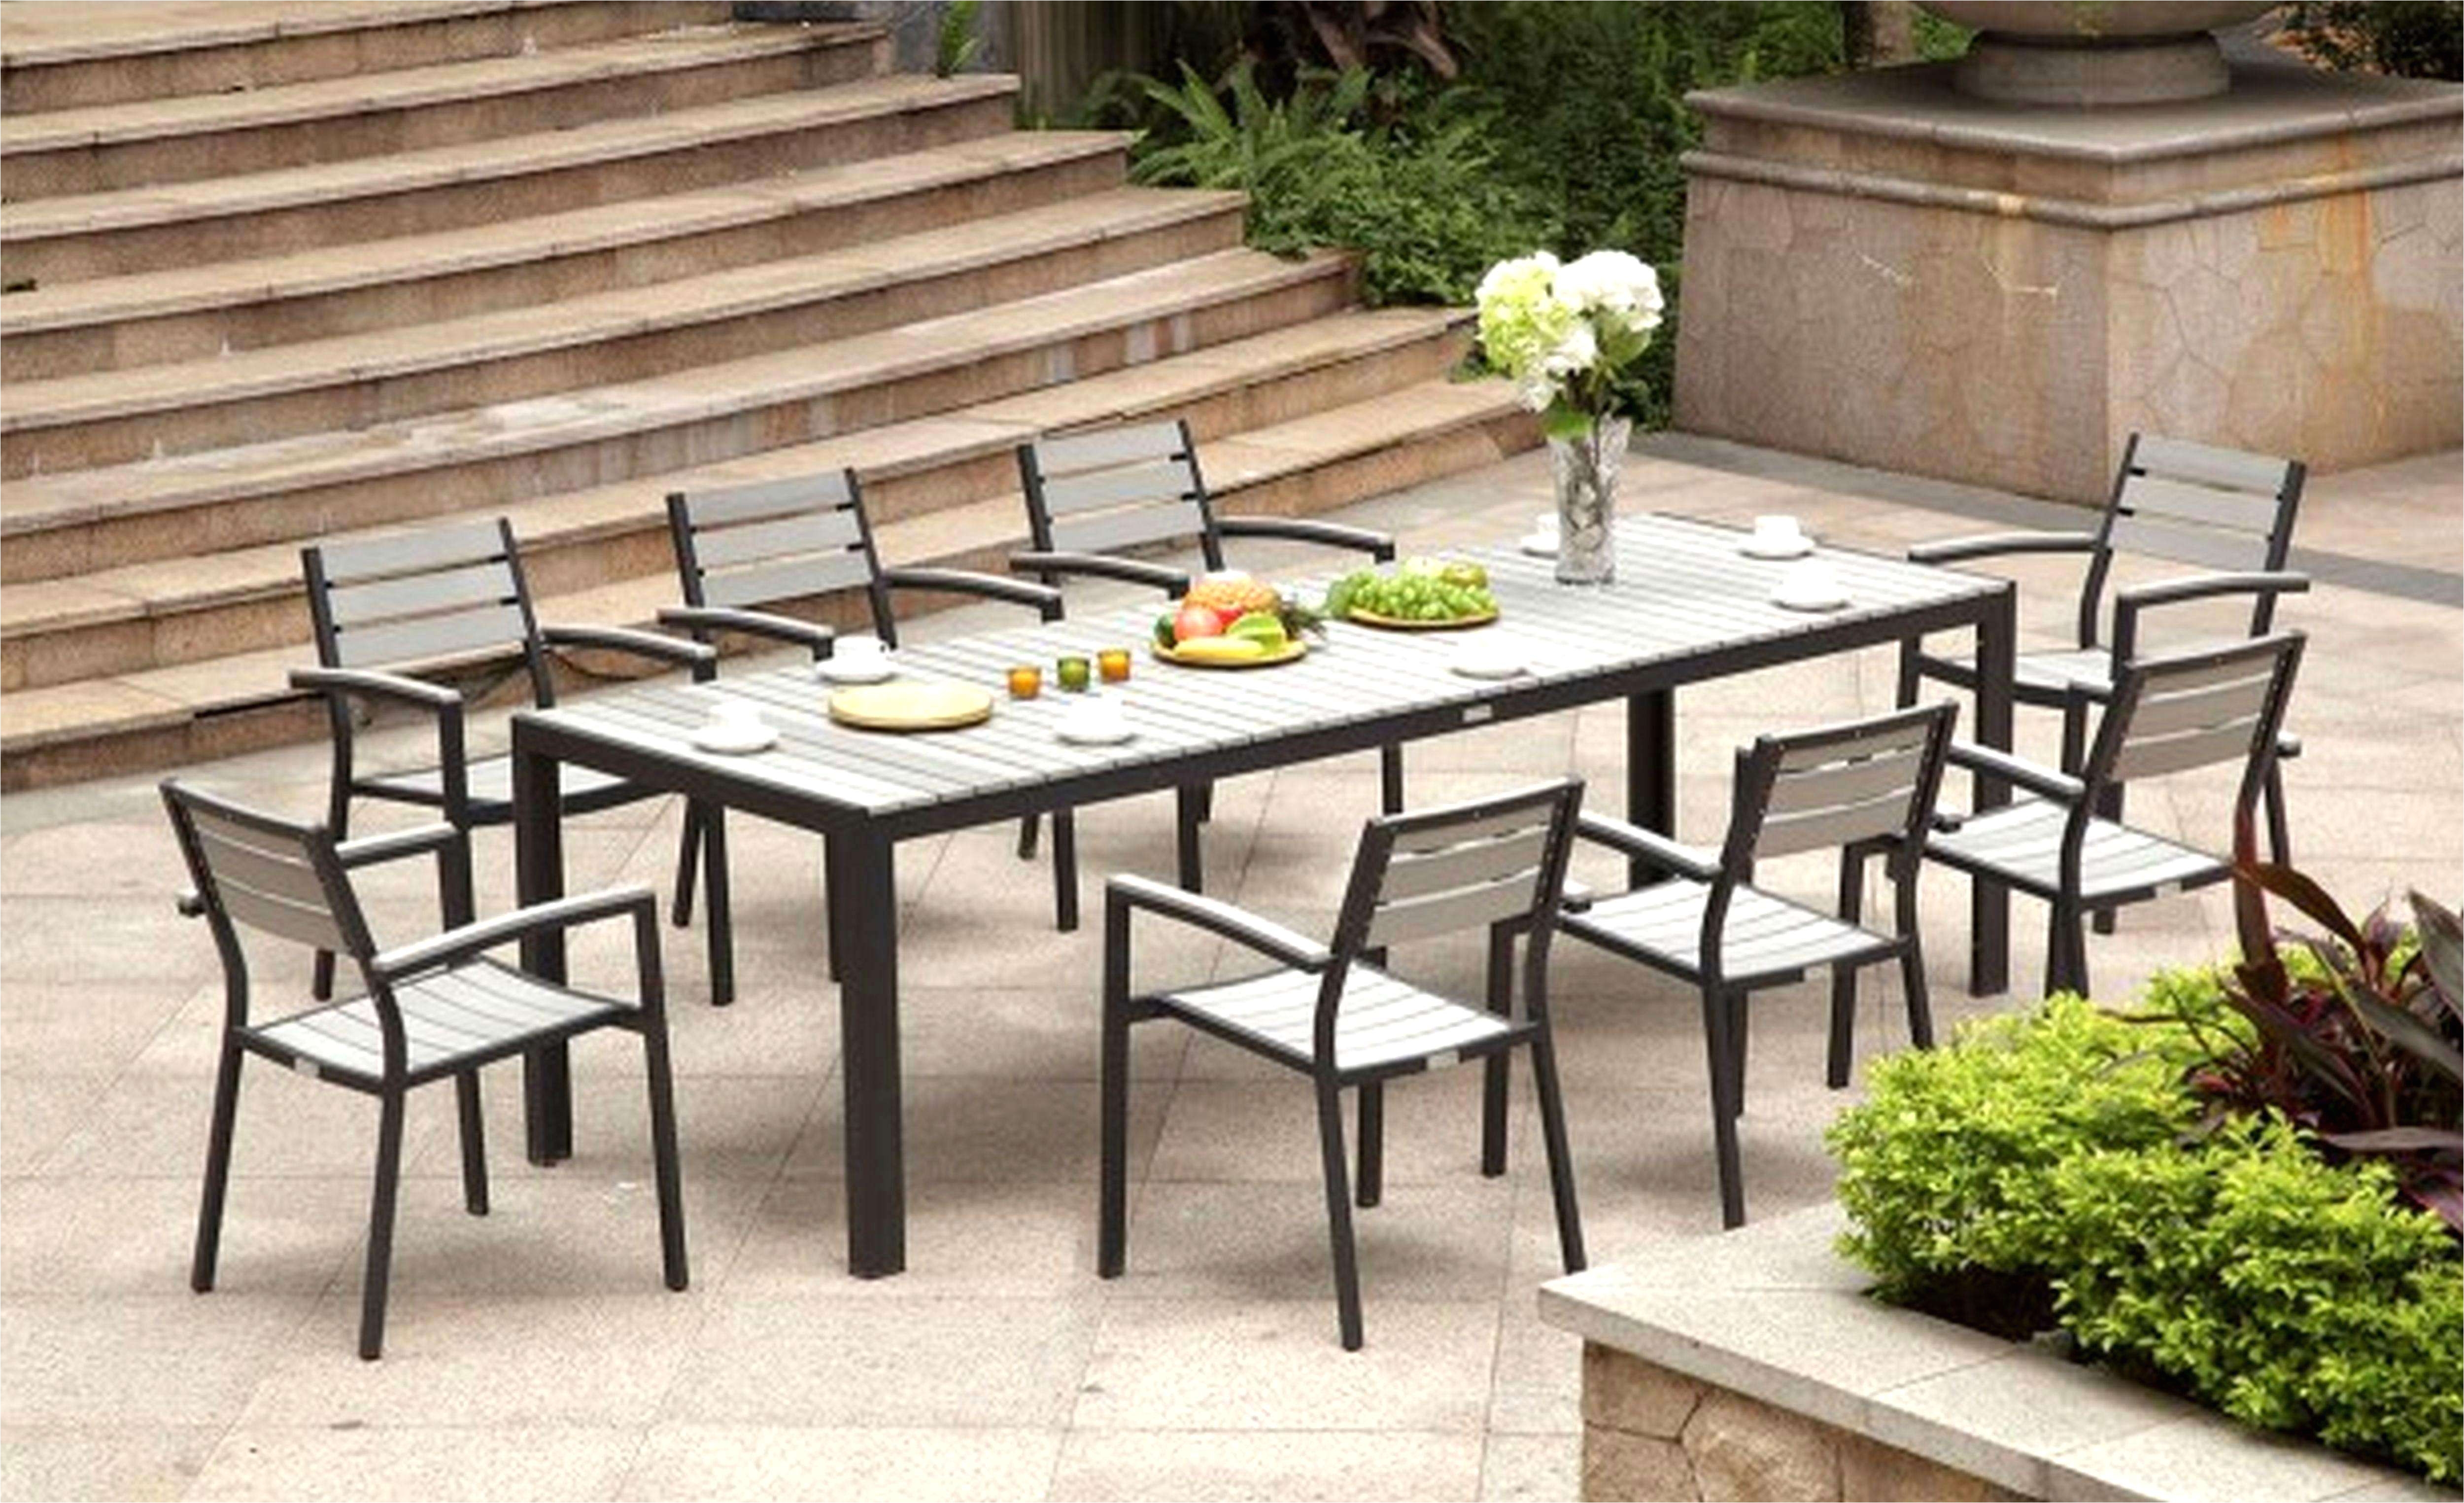 lush poly patio dining table ideas od patio table set concept wooden outdoor table designs